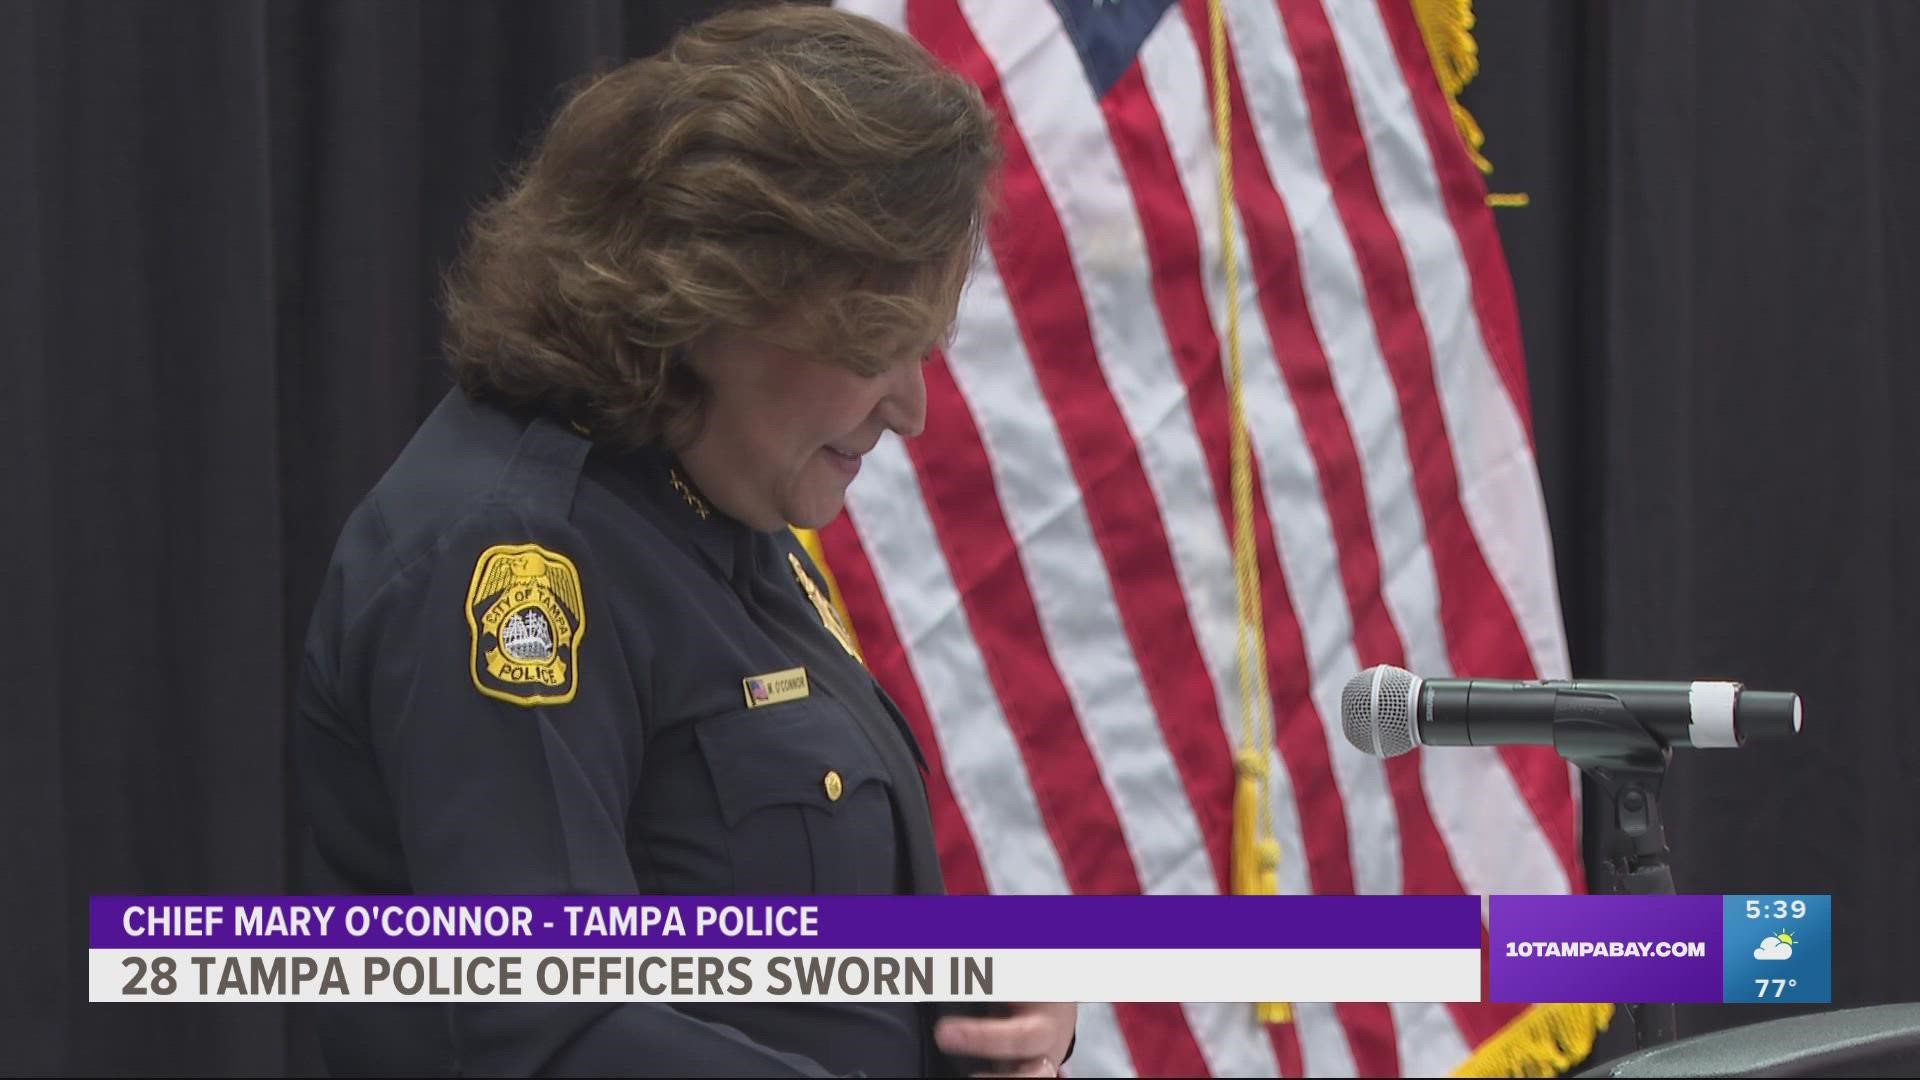 Officers from across the country became members of the Tampa Police Department on Monday.